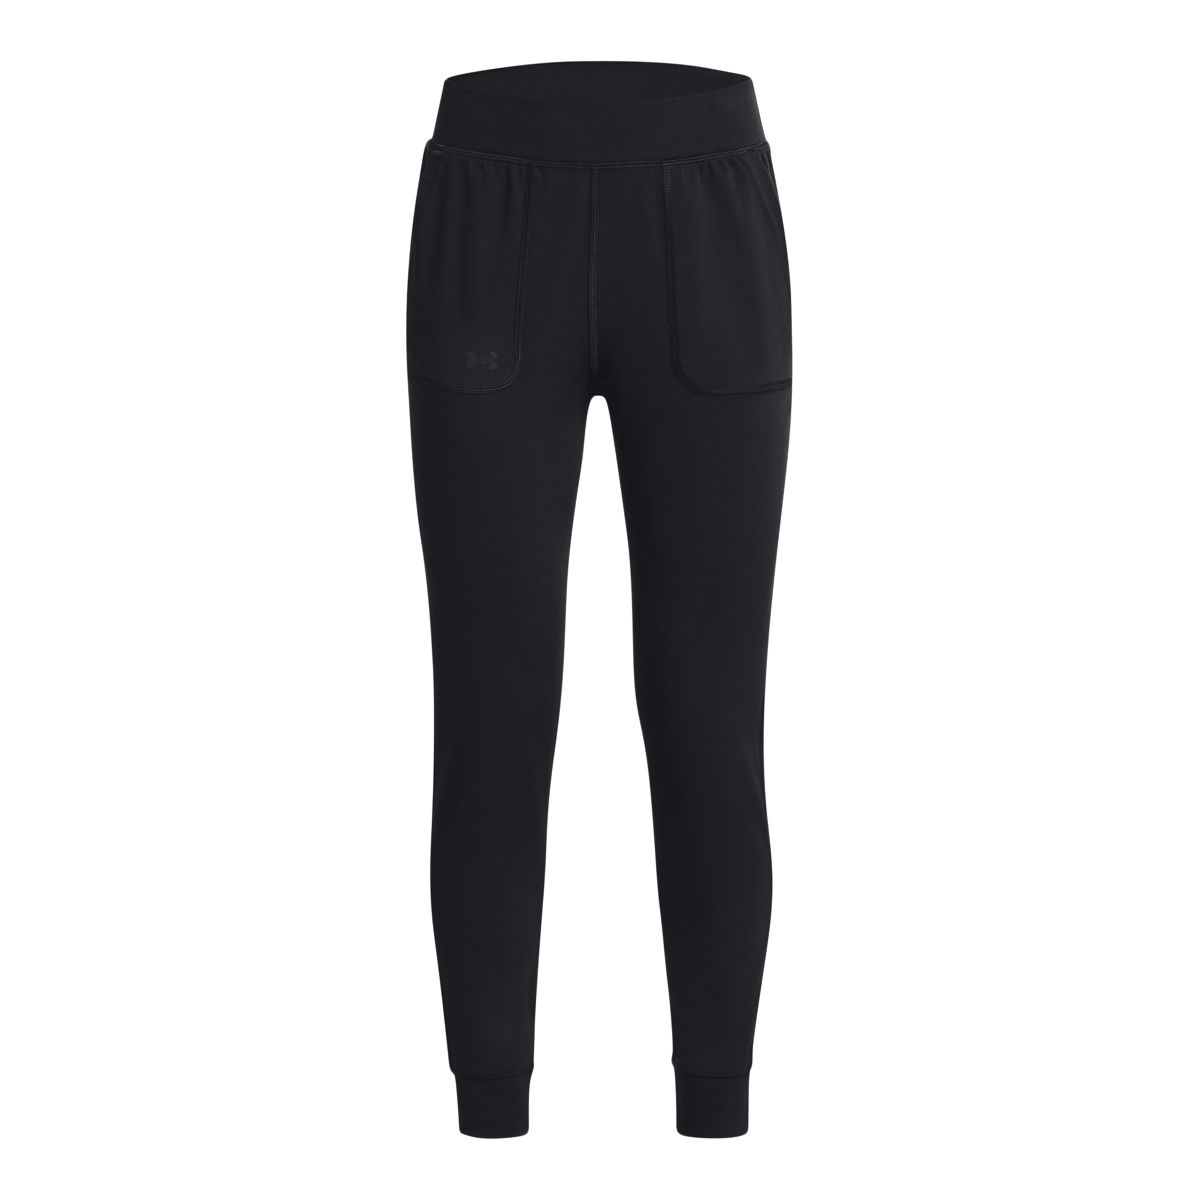 Under Armour Girls' Motion Jogger Pants